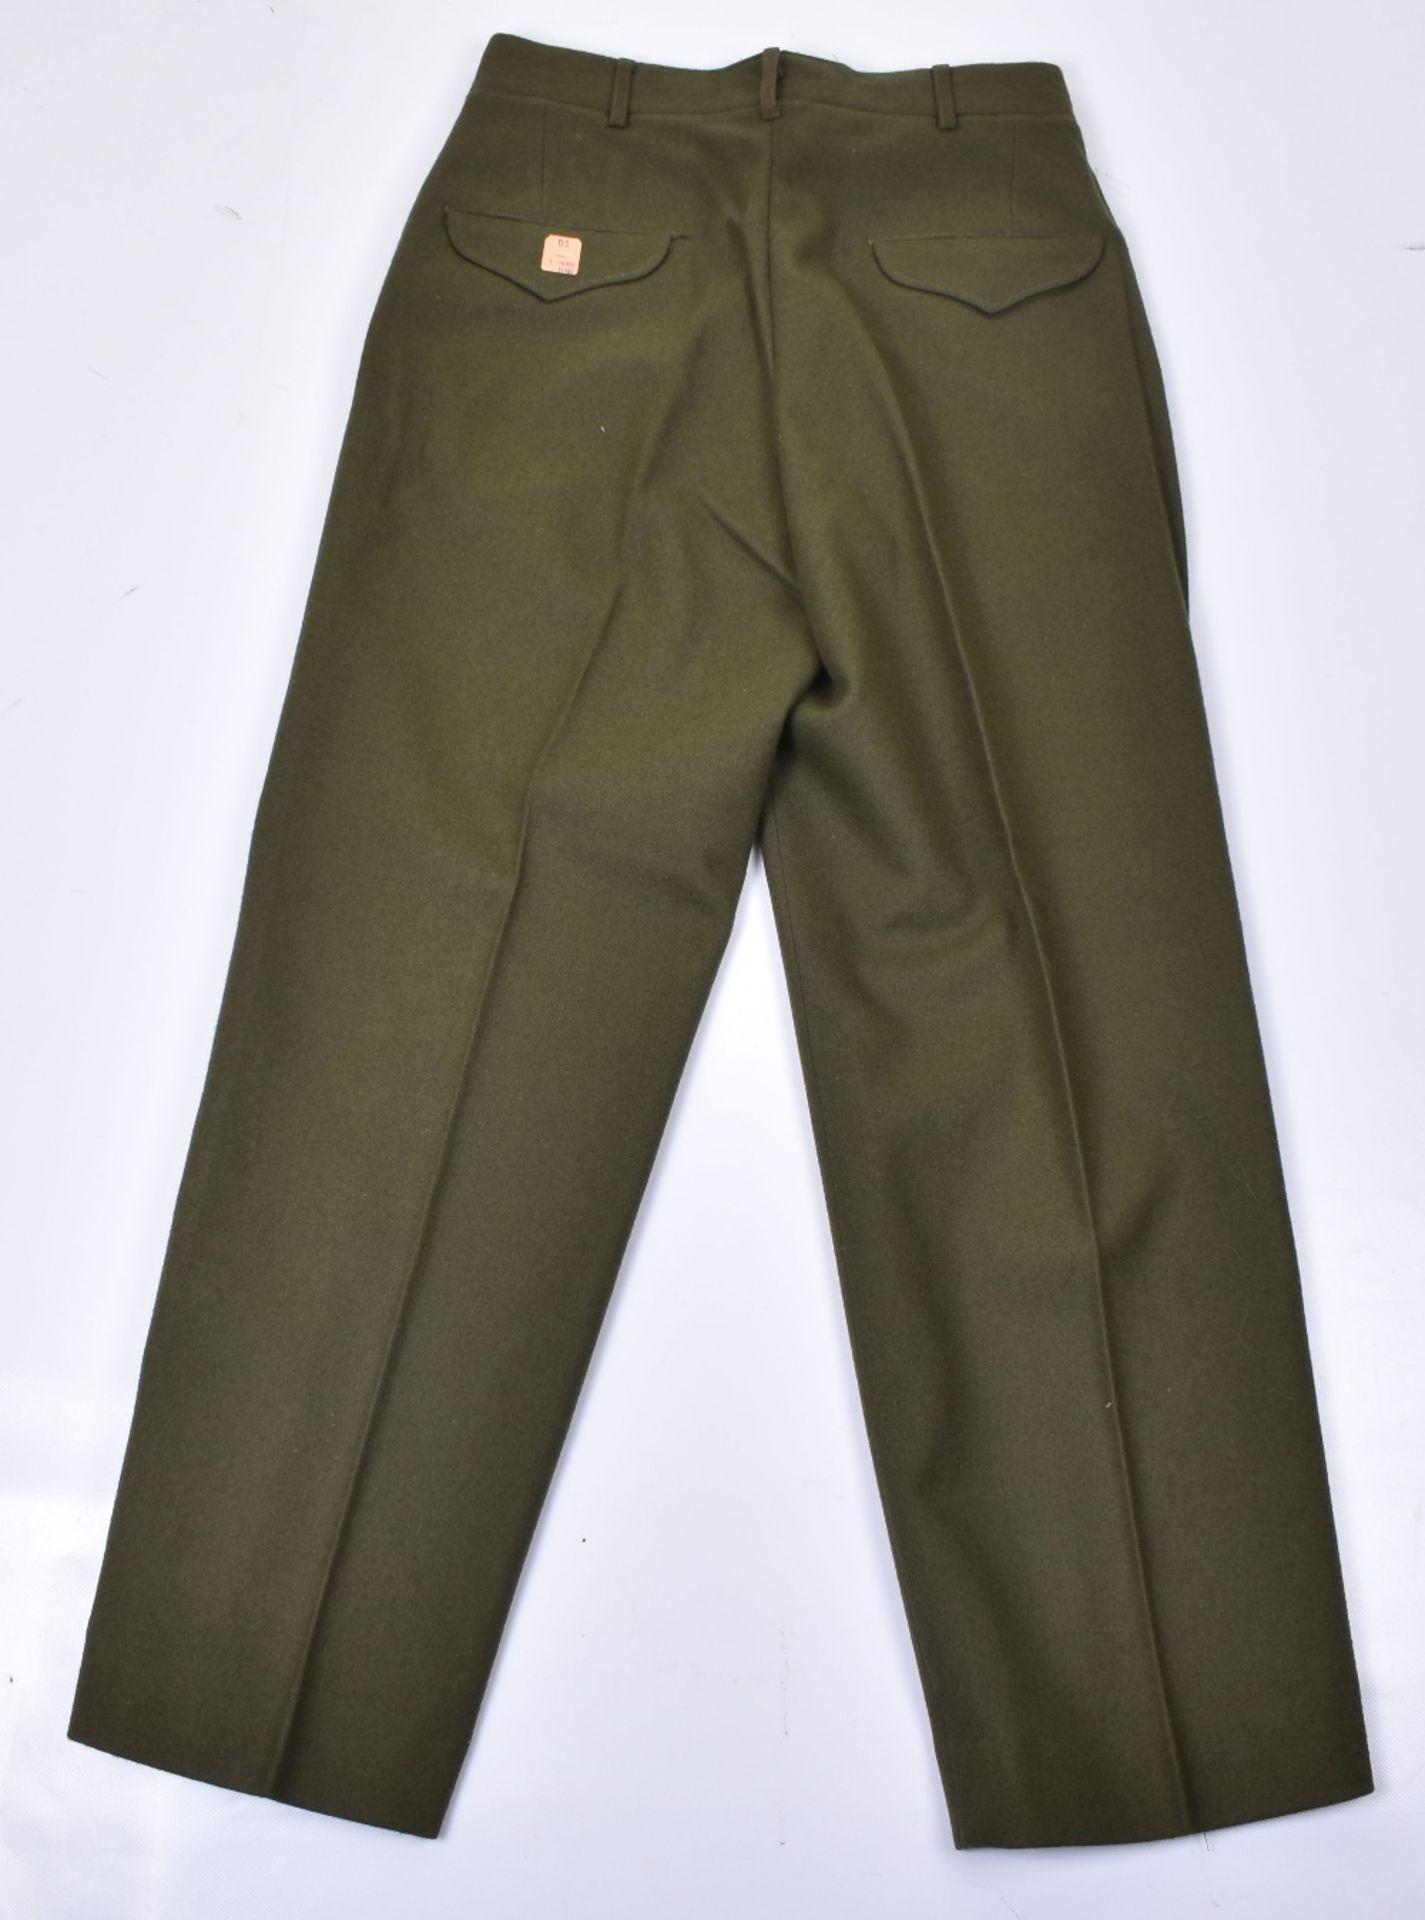 WW2 American Military Ike Jacket and Trousers - Image 11 of 12